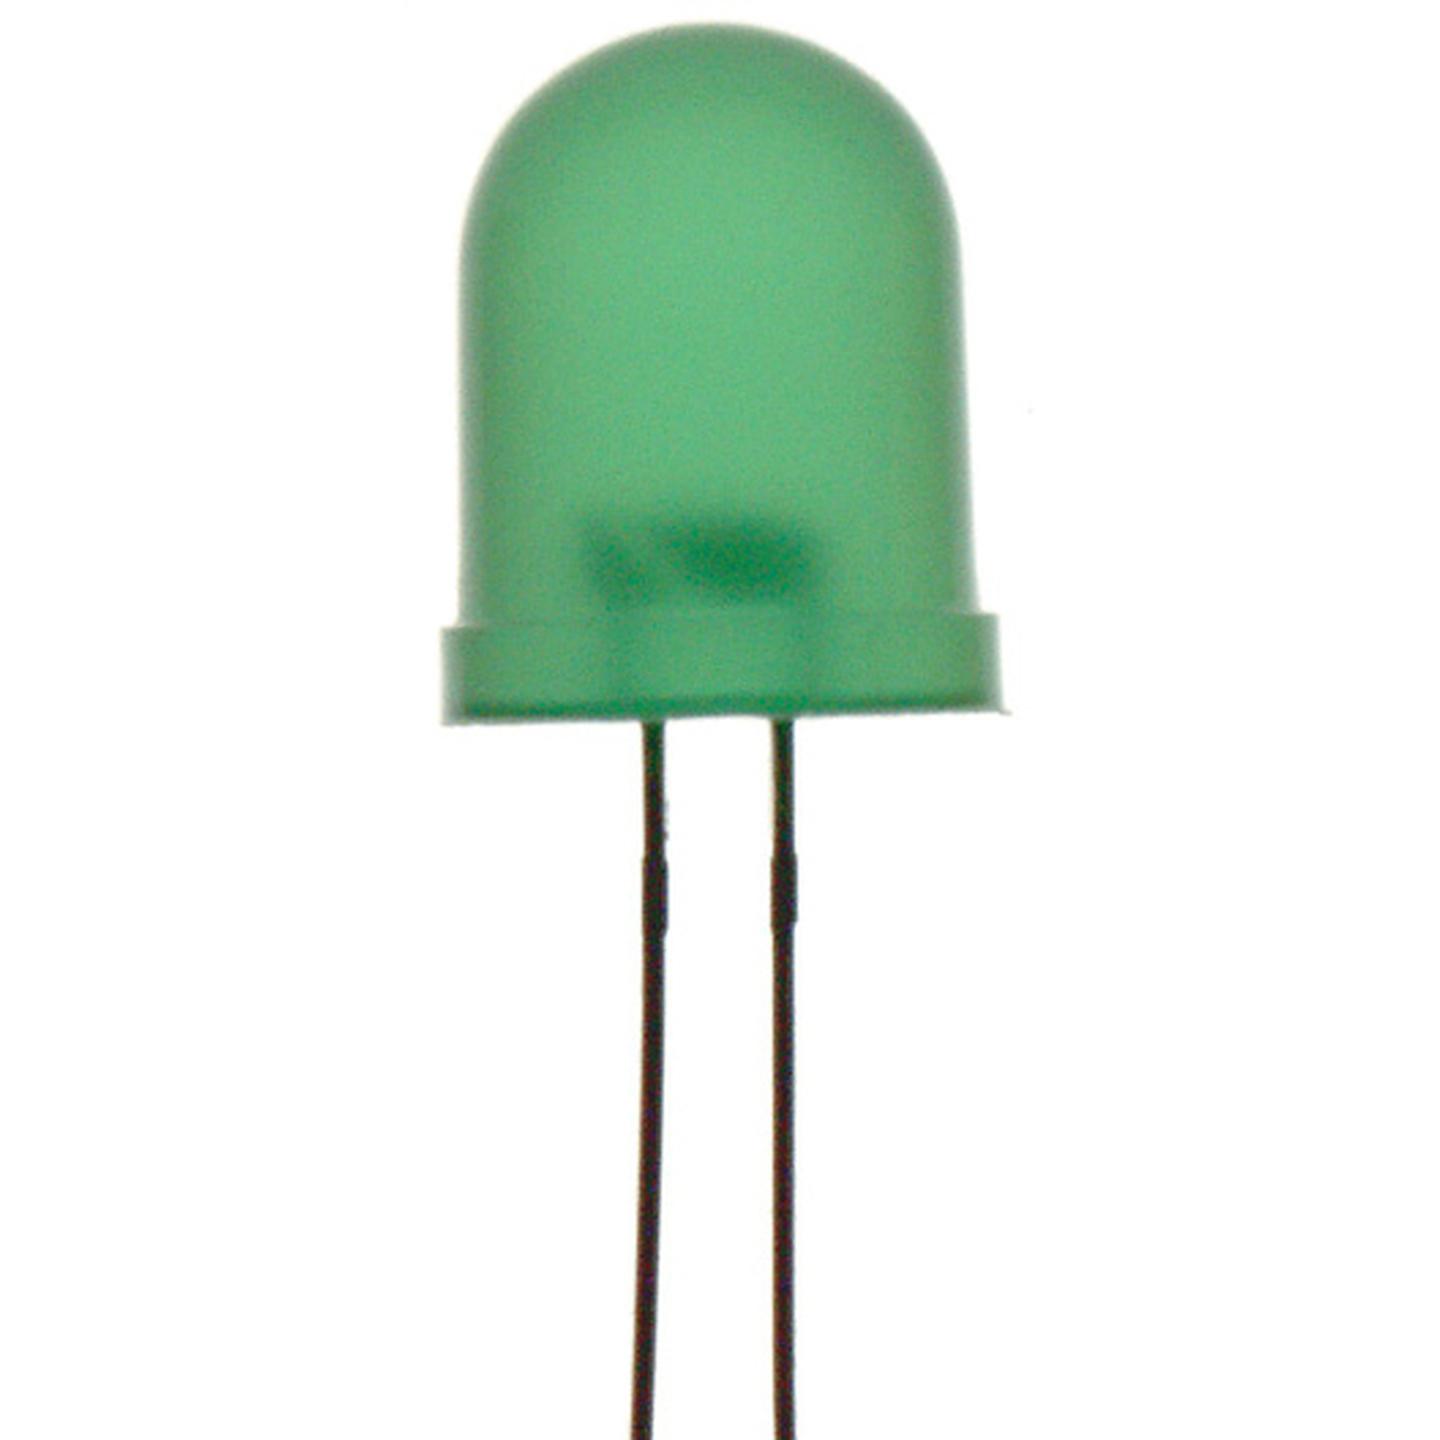 Green 10mm LED 100mcd Round Diffused